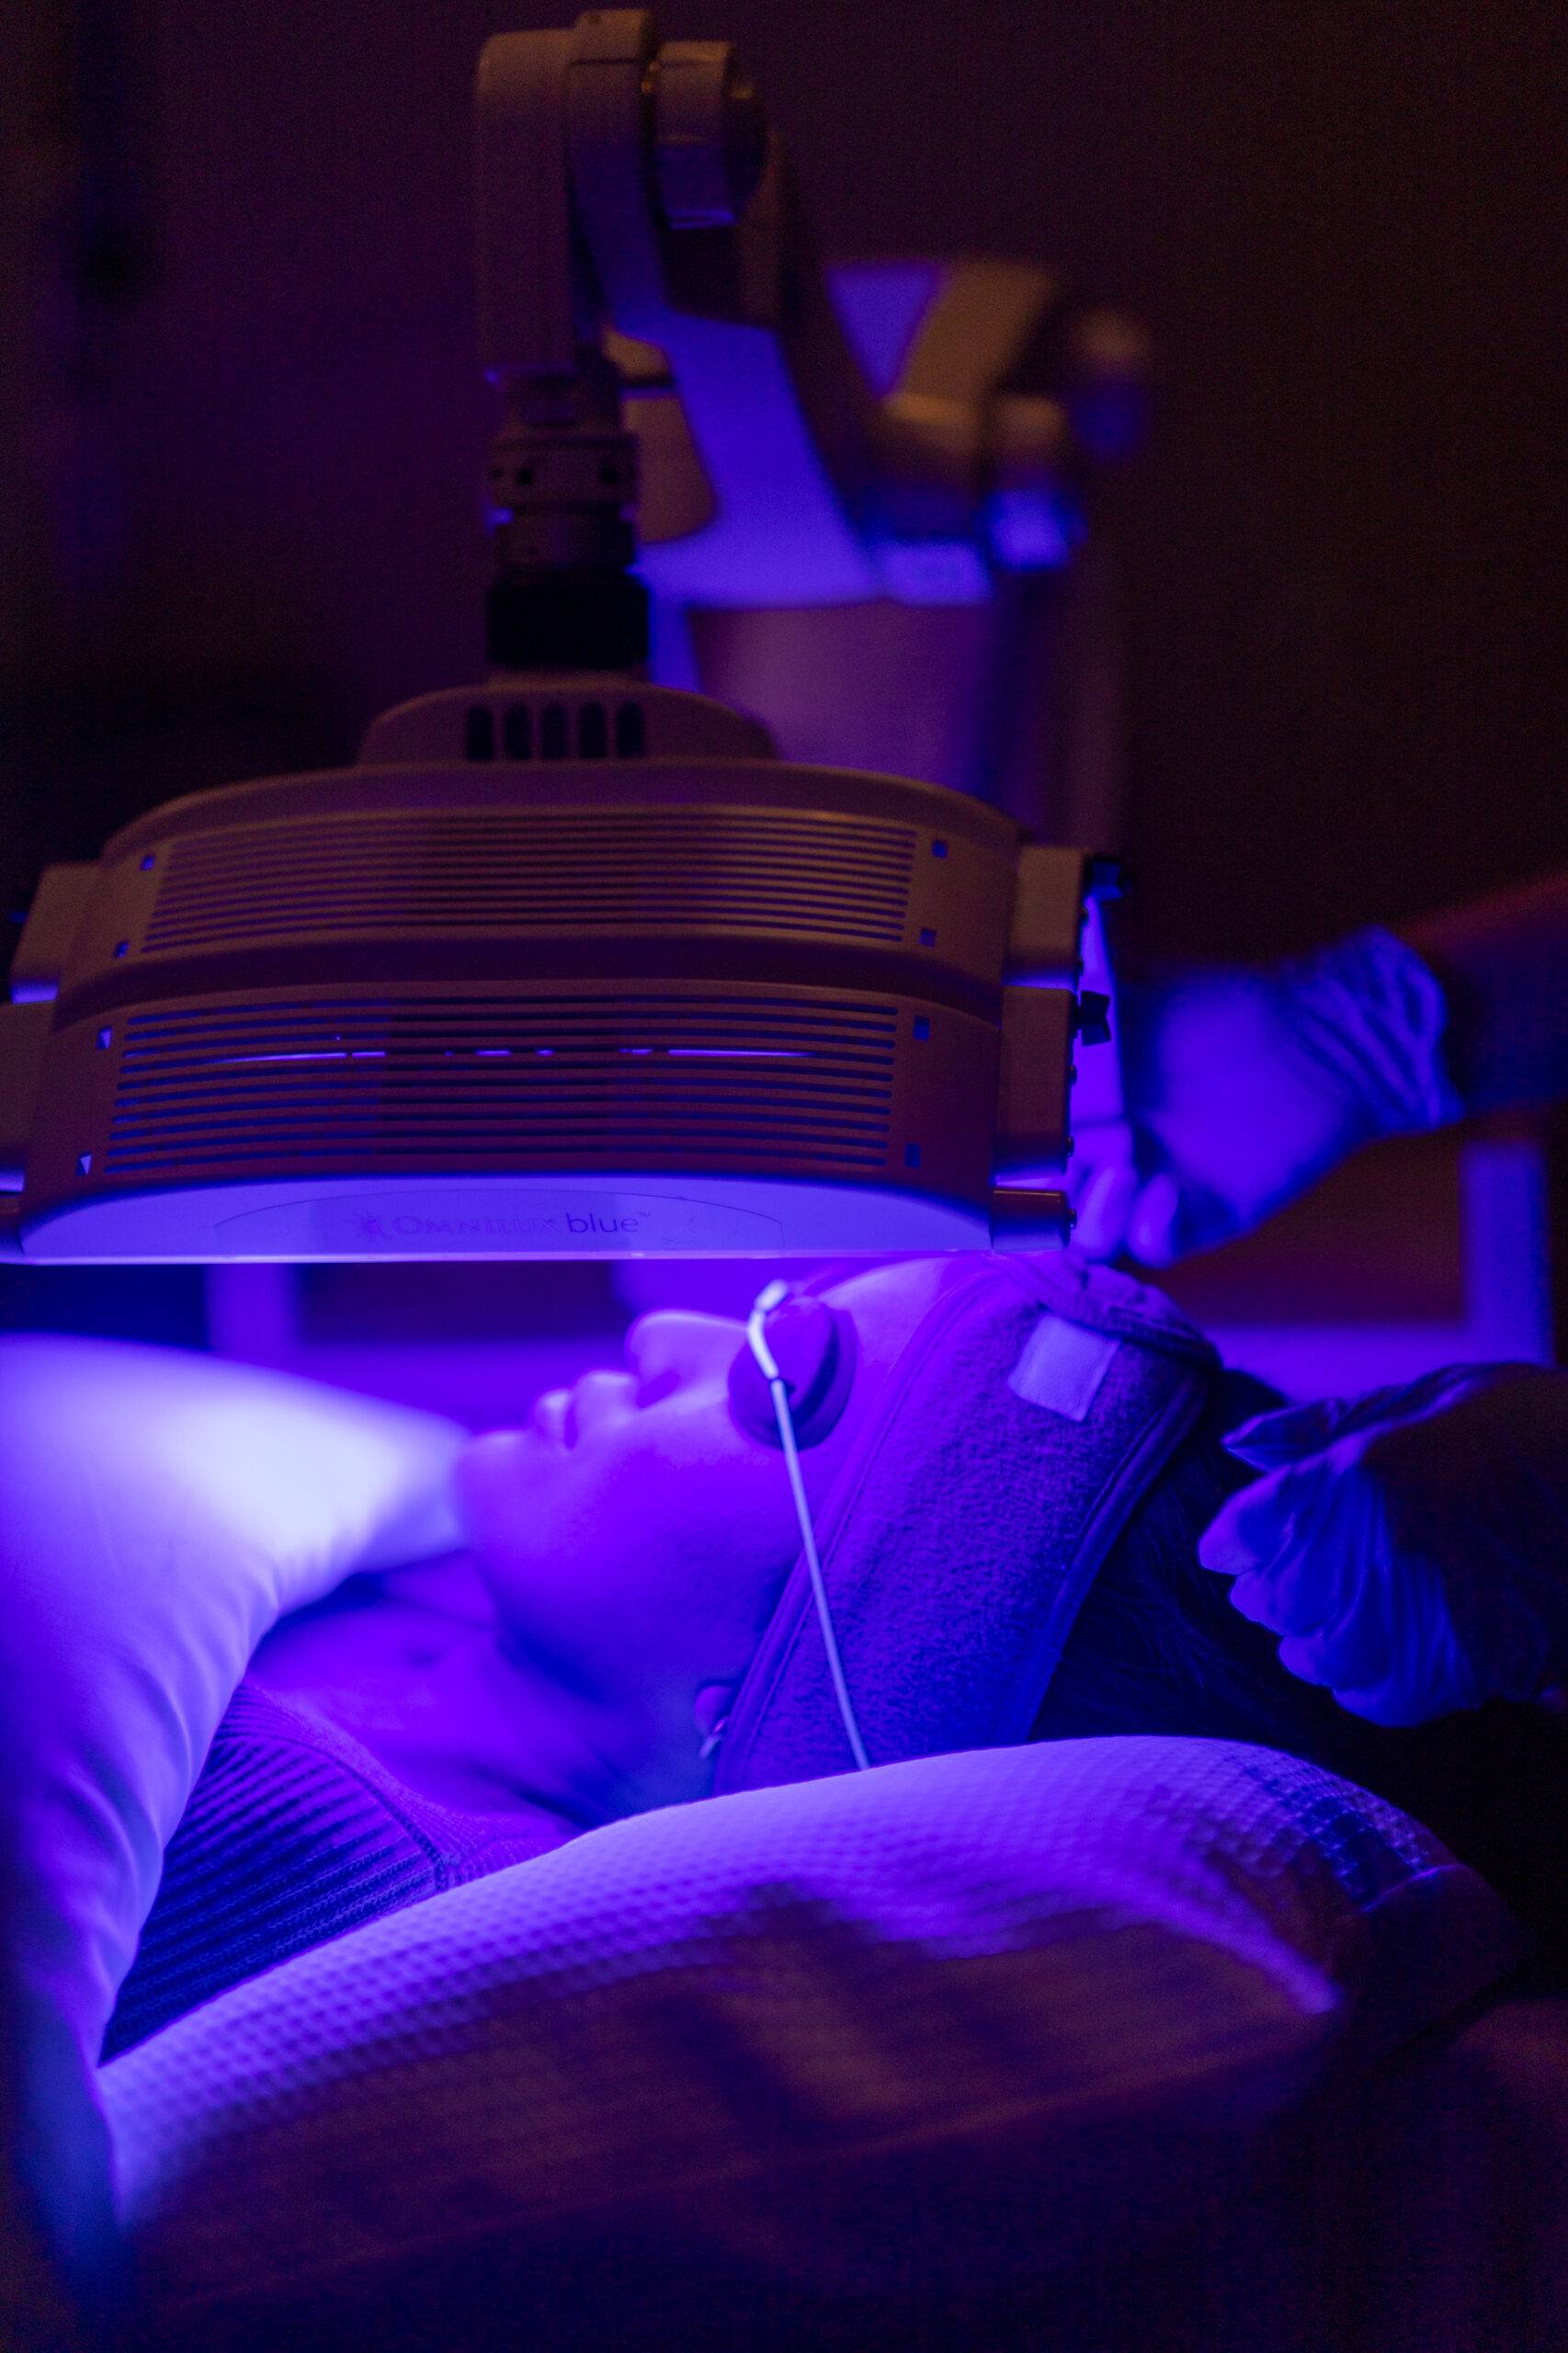 A woman undergoes a skincare treatment using the Omnilux machine emitting a blue light, in a dimly lit spa environment. She is resting on her back with eyes covered for protection.